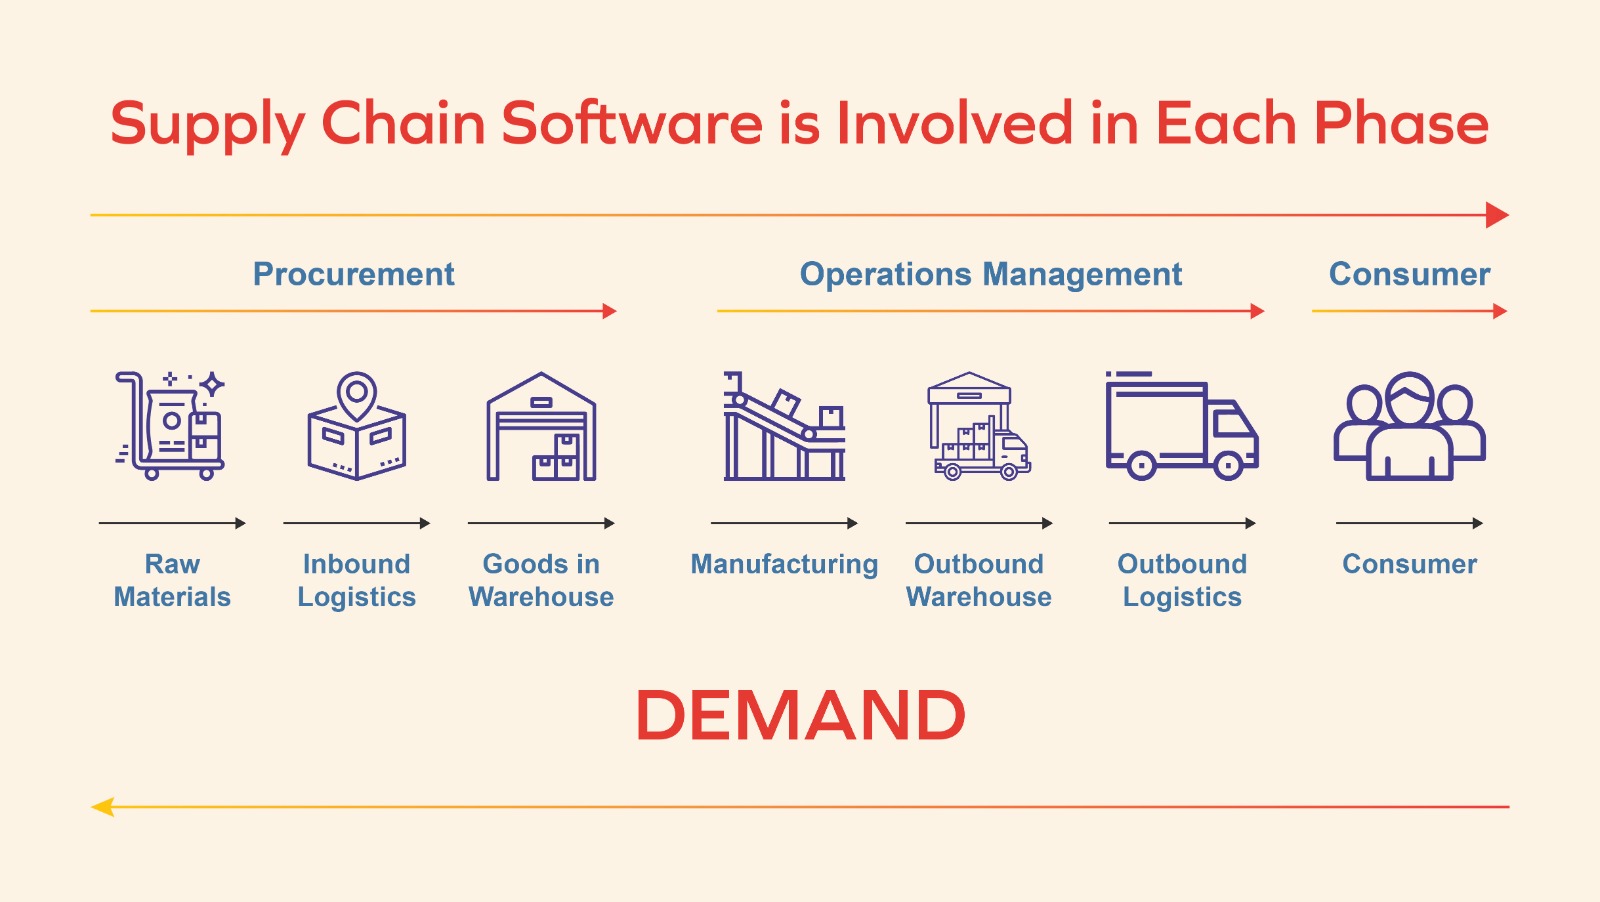 Supply Chain Software is Involved in Each Phase